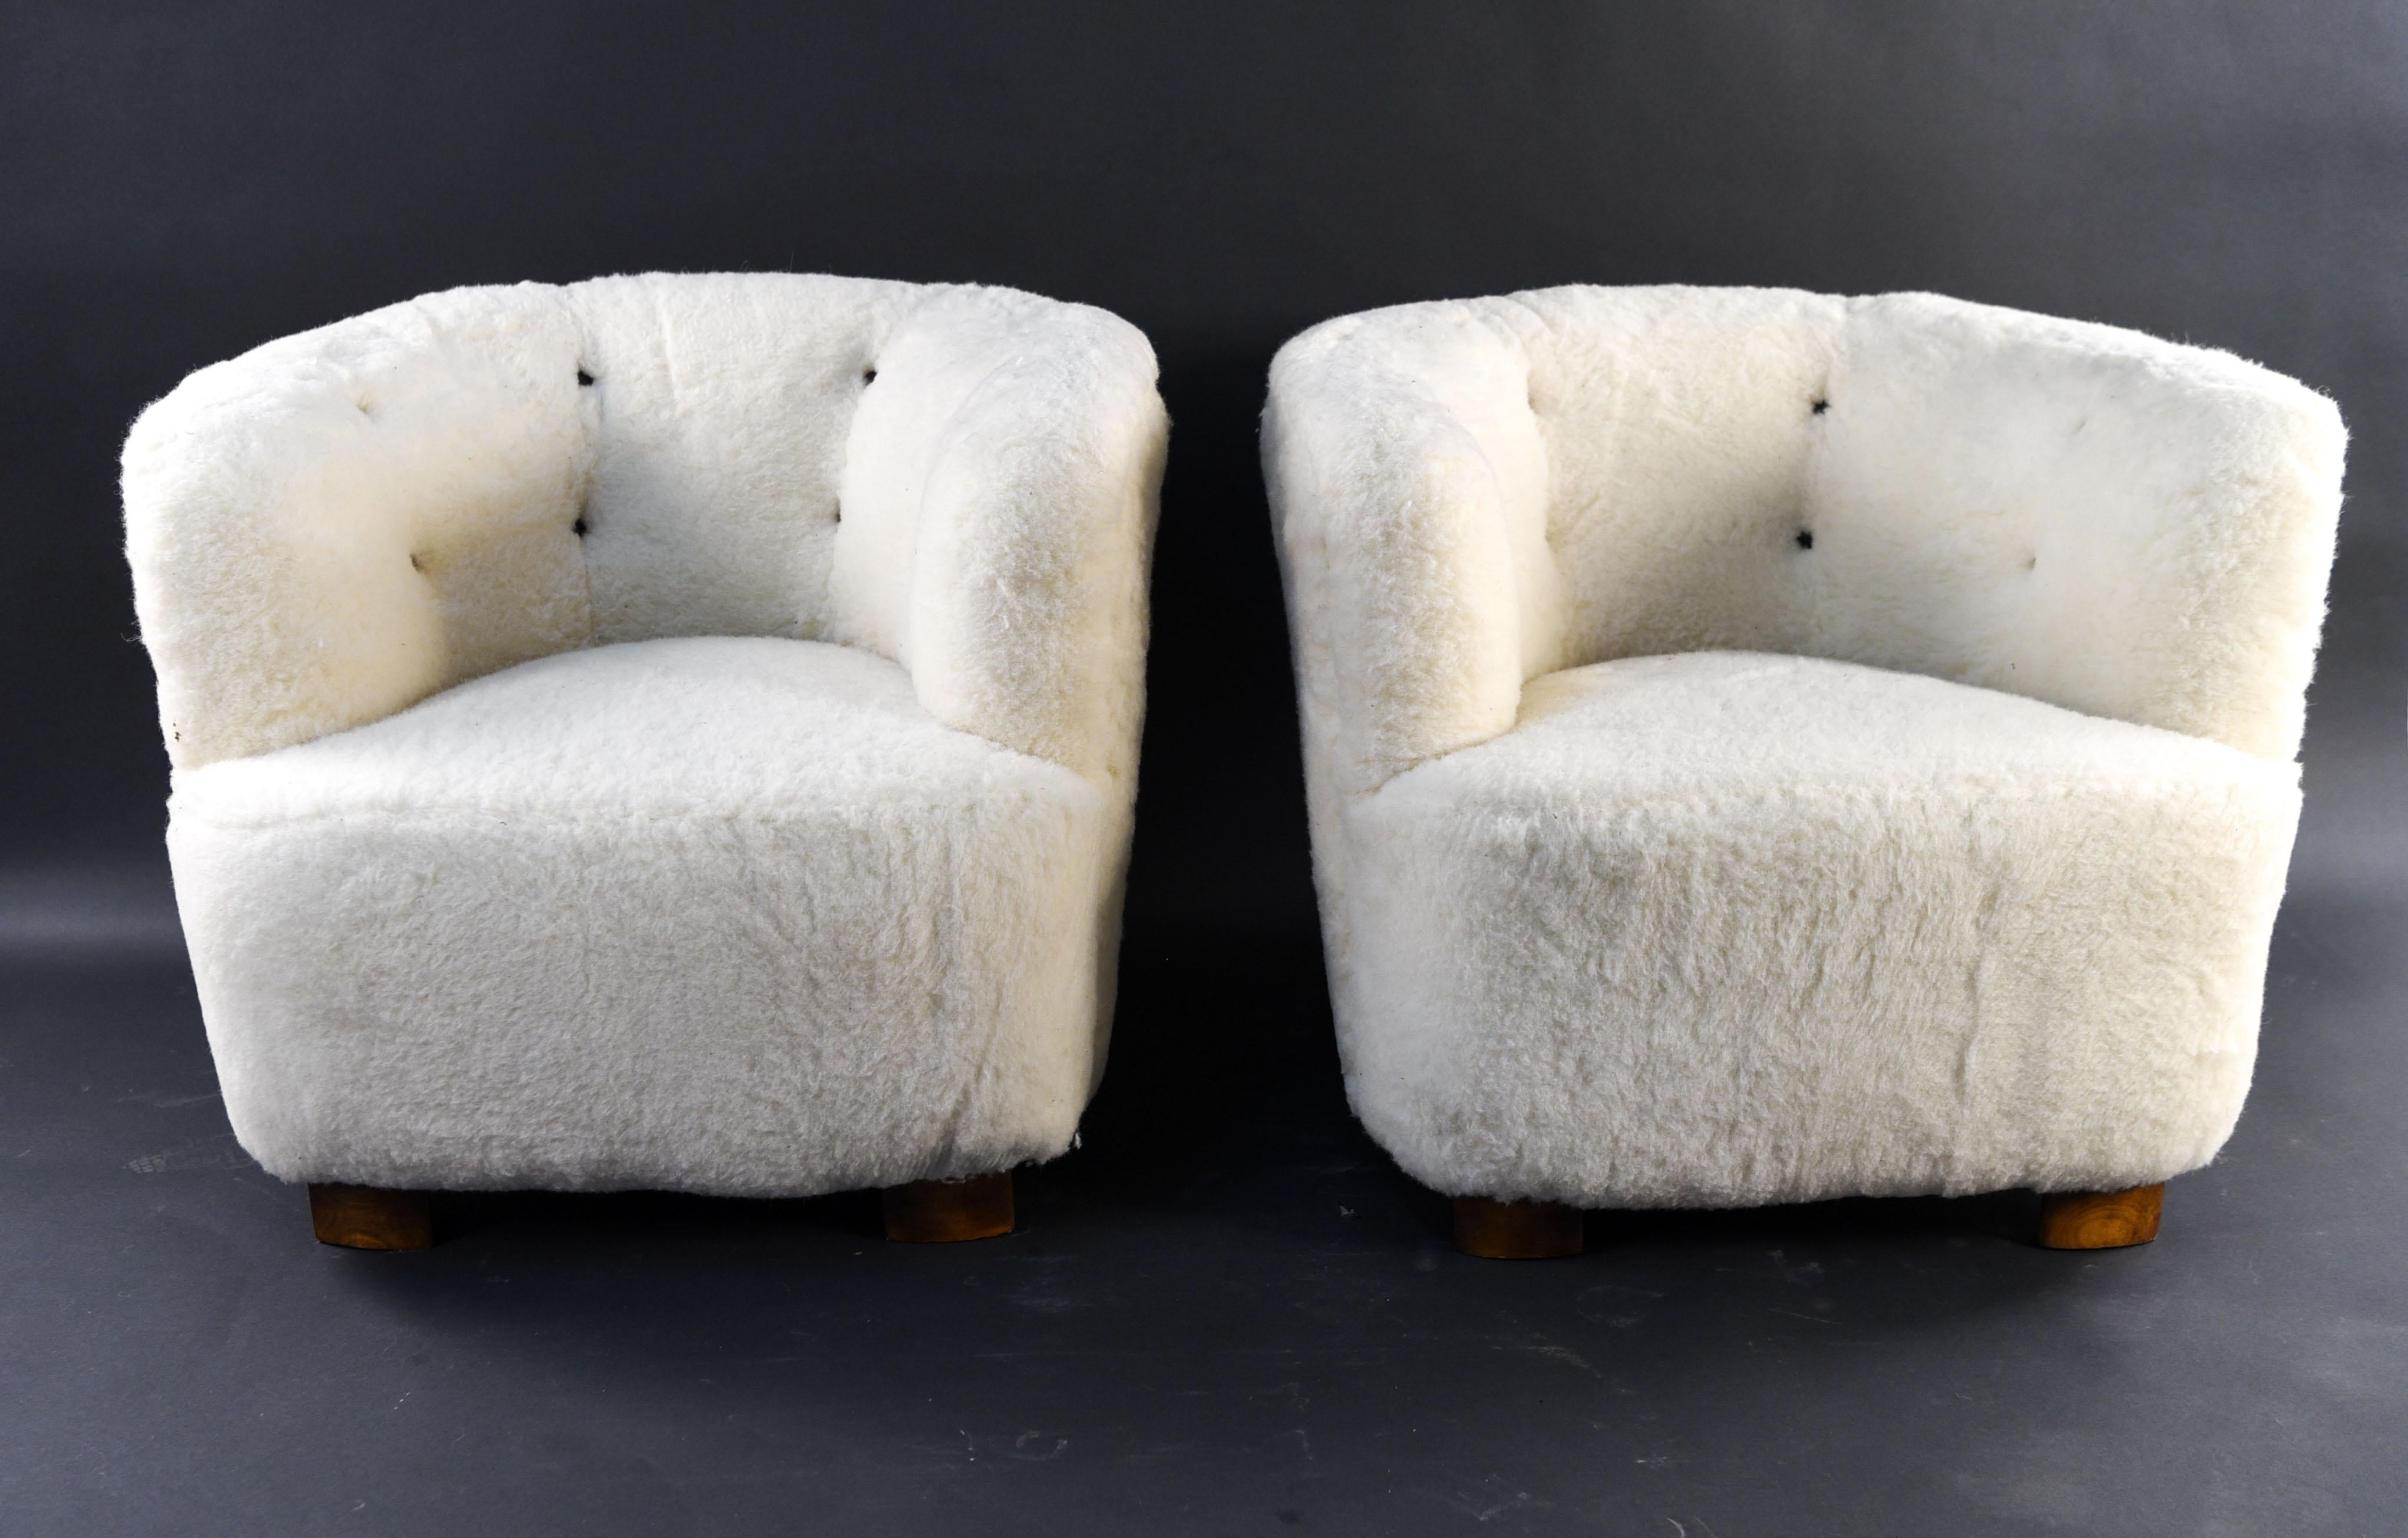 This beautiful art deco inspired pair of Danish midcentury lounge chairs were designed by Viggo Boesen for Slagelse Mobelvaerk. The epitome of comfort, these chairs are upholstered in a lamb's wool with a tufted back detail.